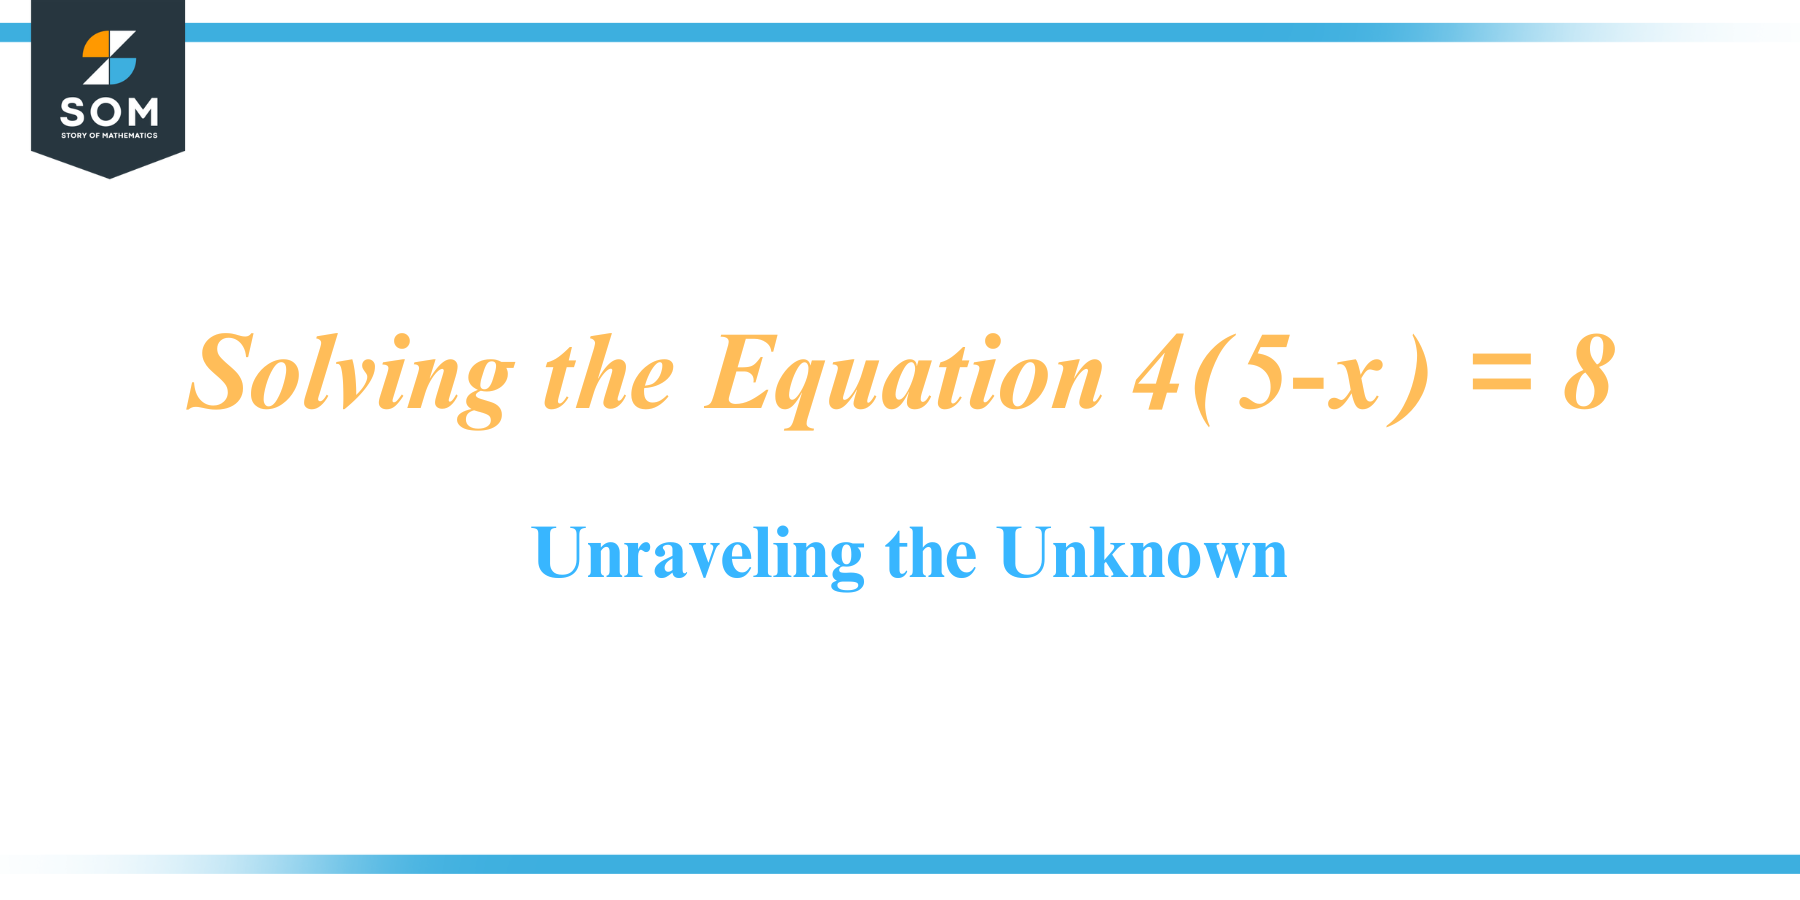 Solving the Equation 45 x equals 8 Unraveling the Unknown